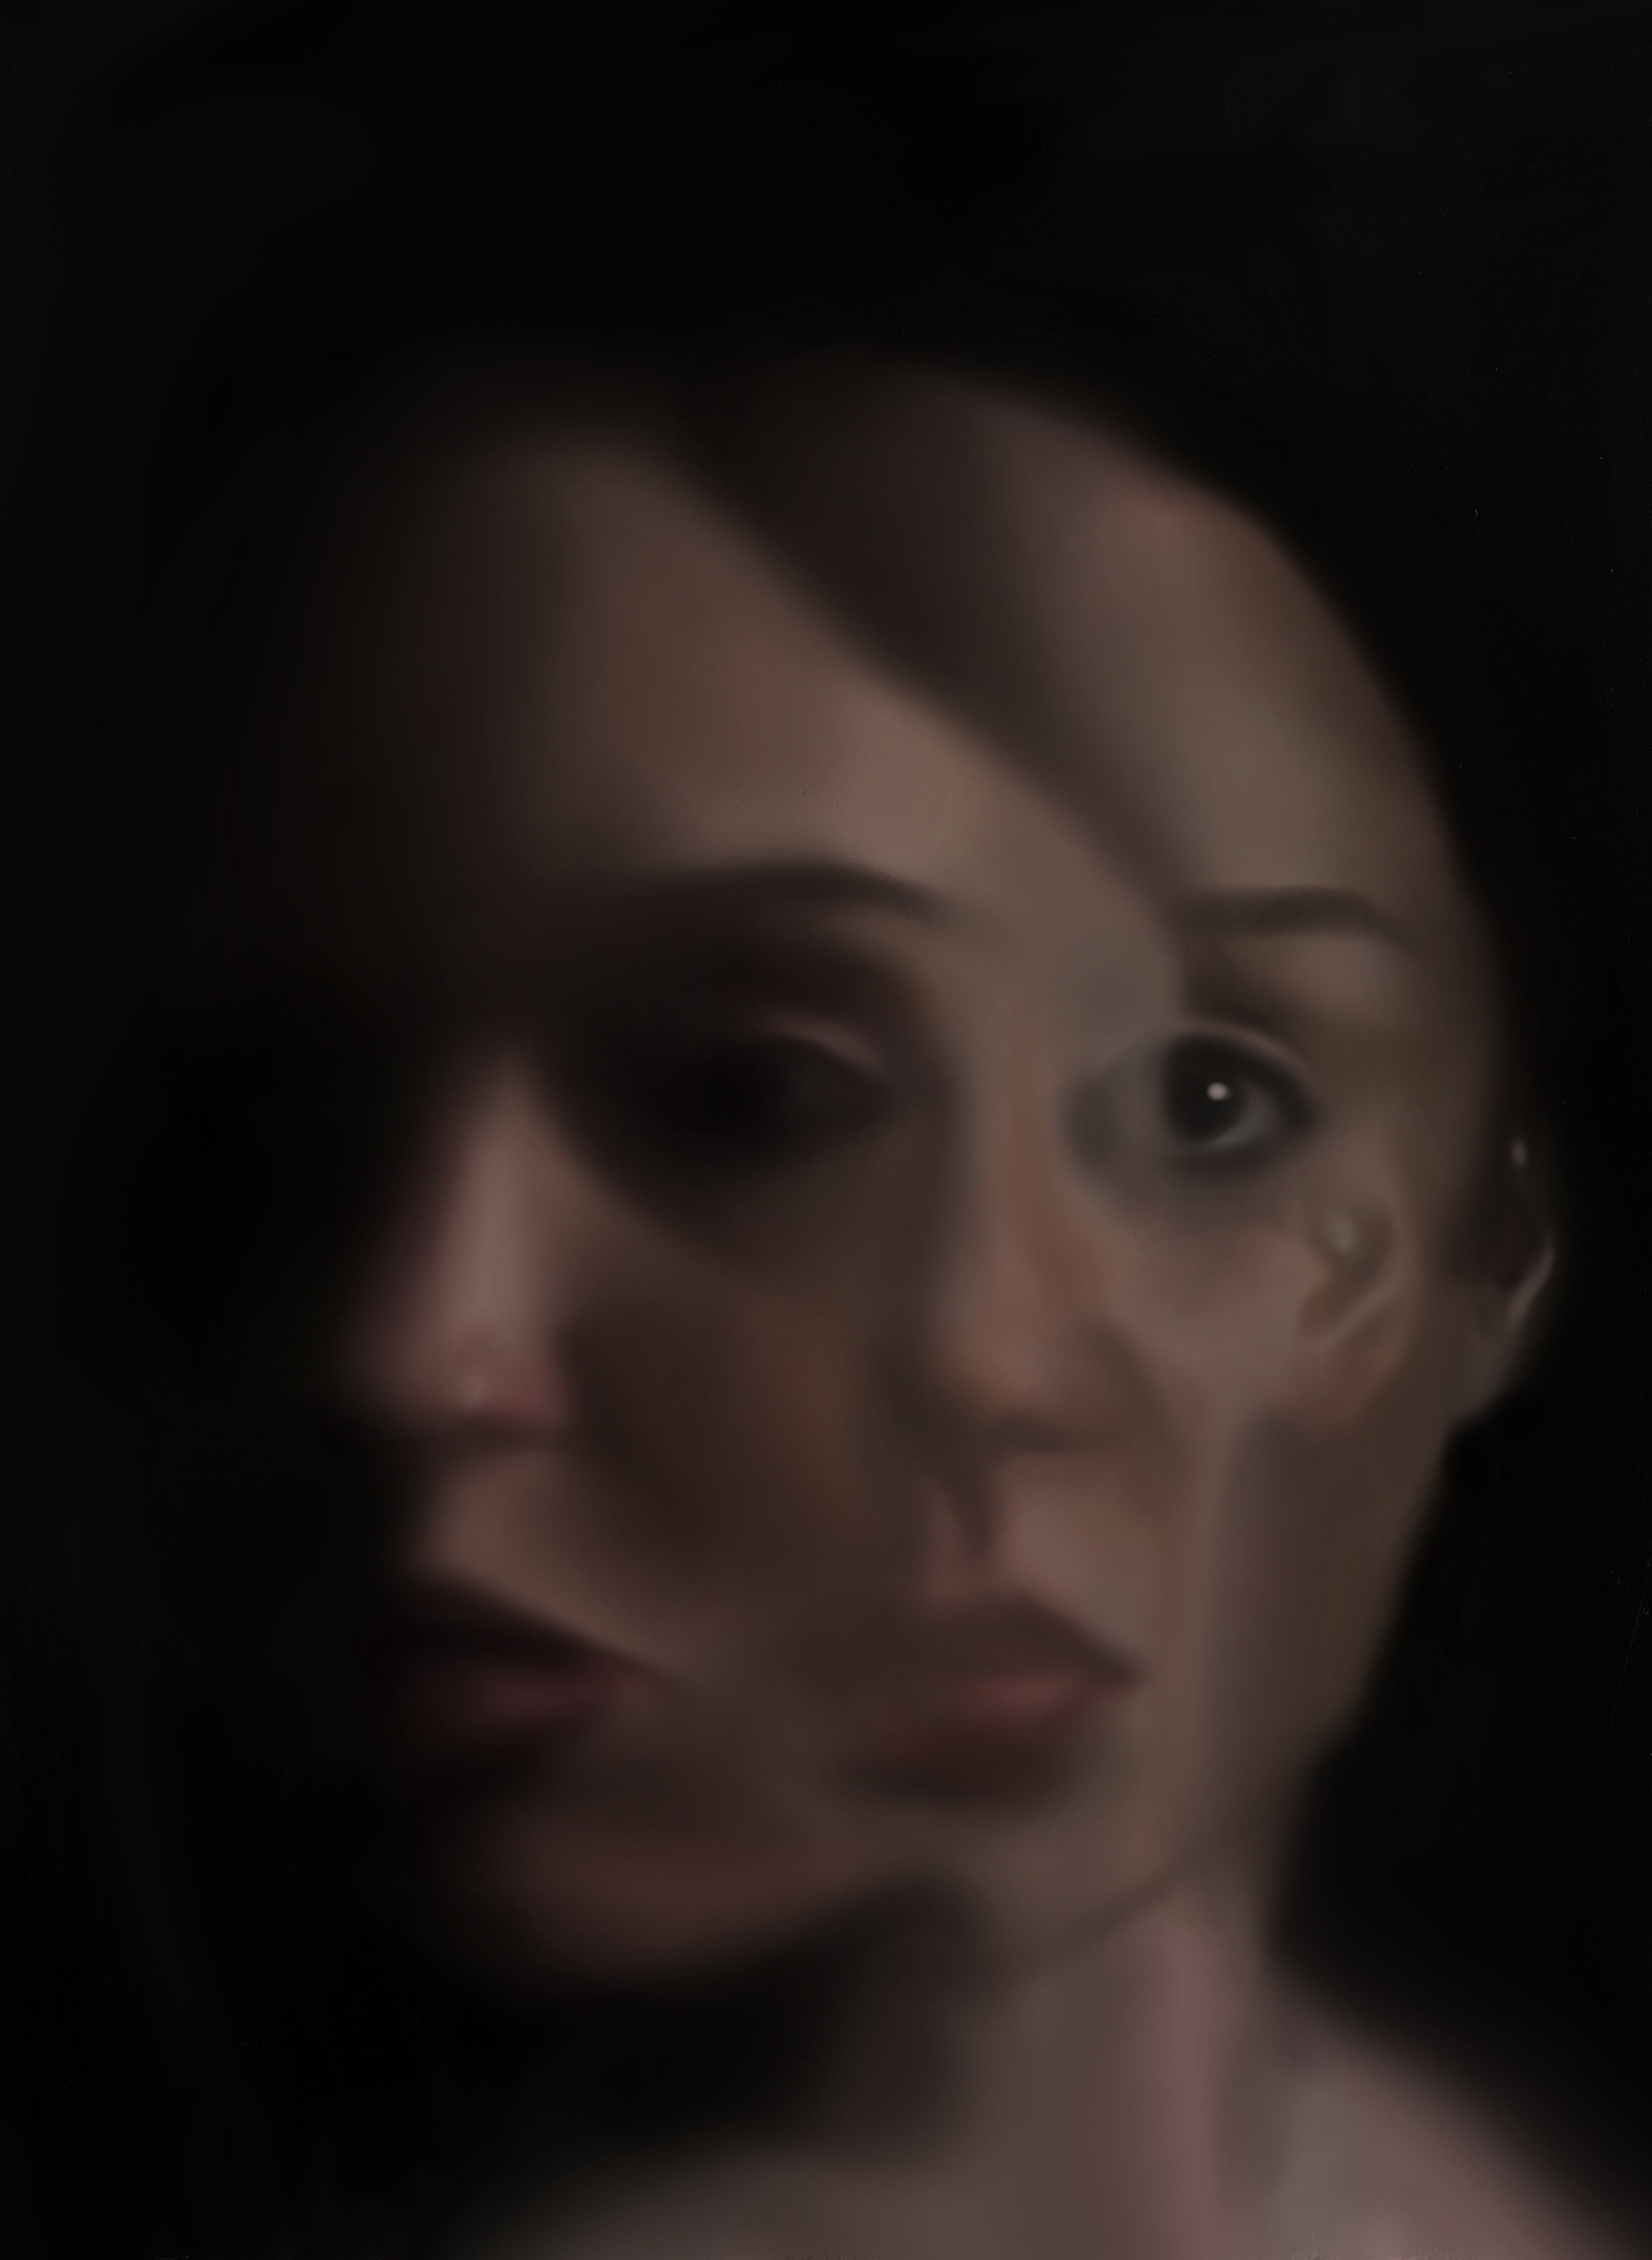 Fine Art work by Beth Mack showing a painting of a distorted face, one looking to the left and the other looking straight ahead with a black background